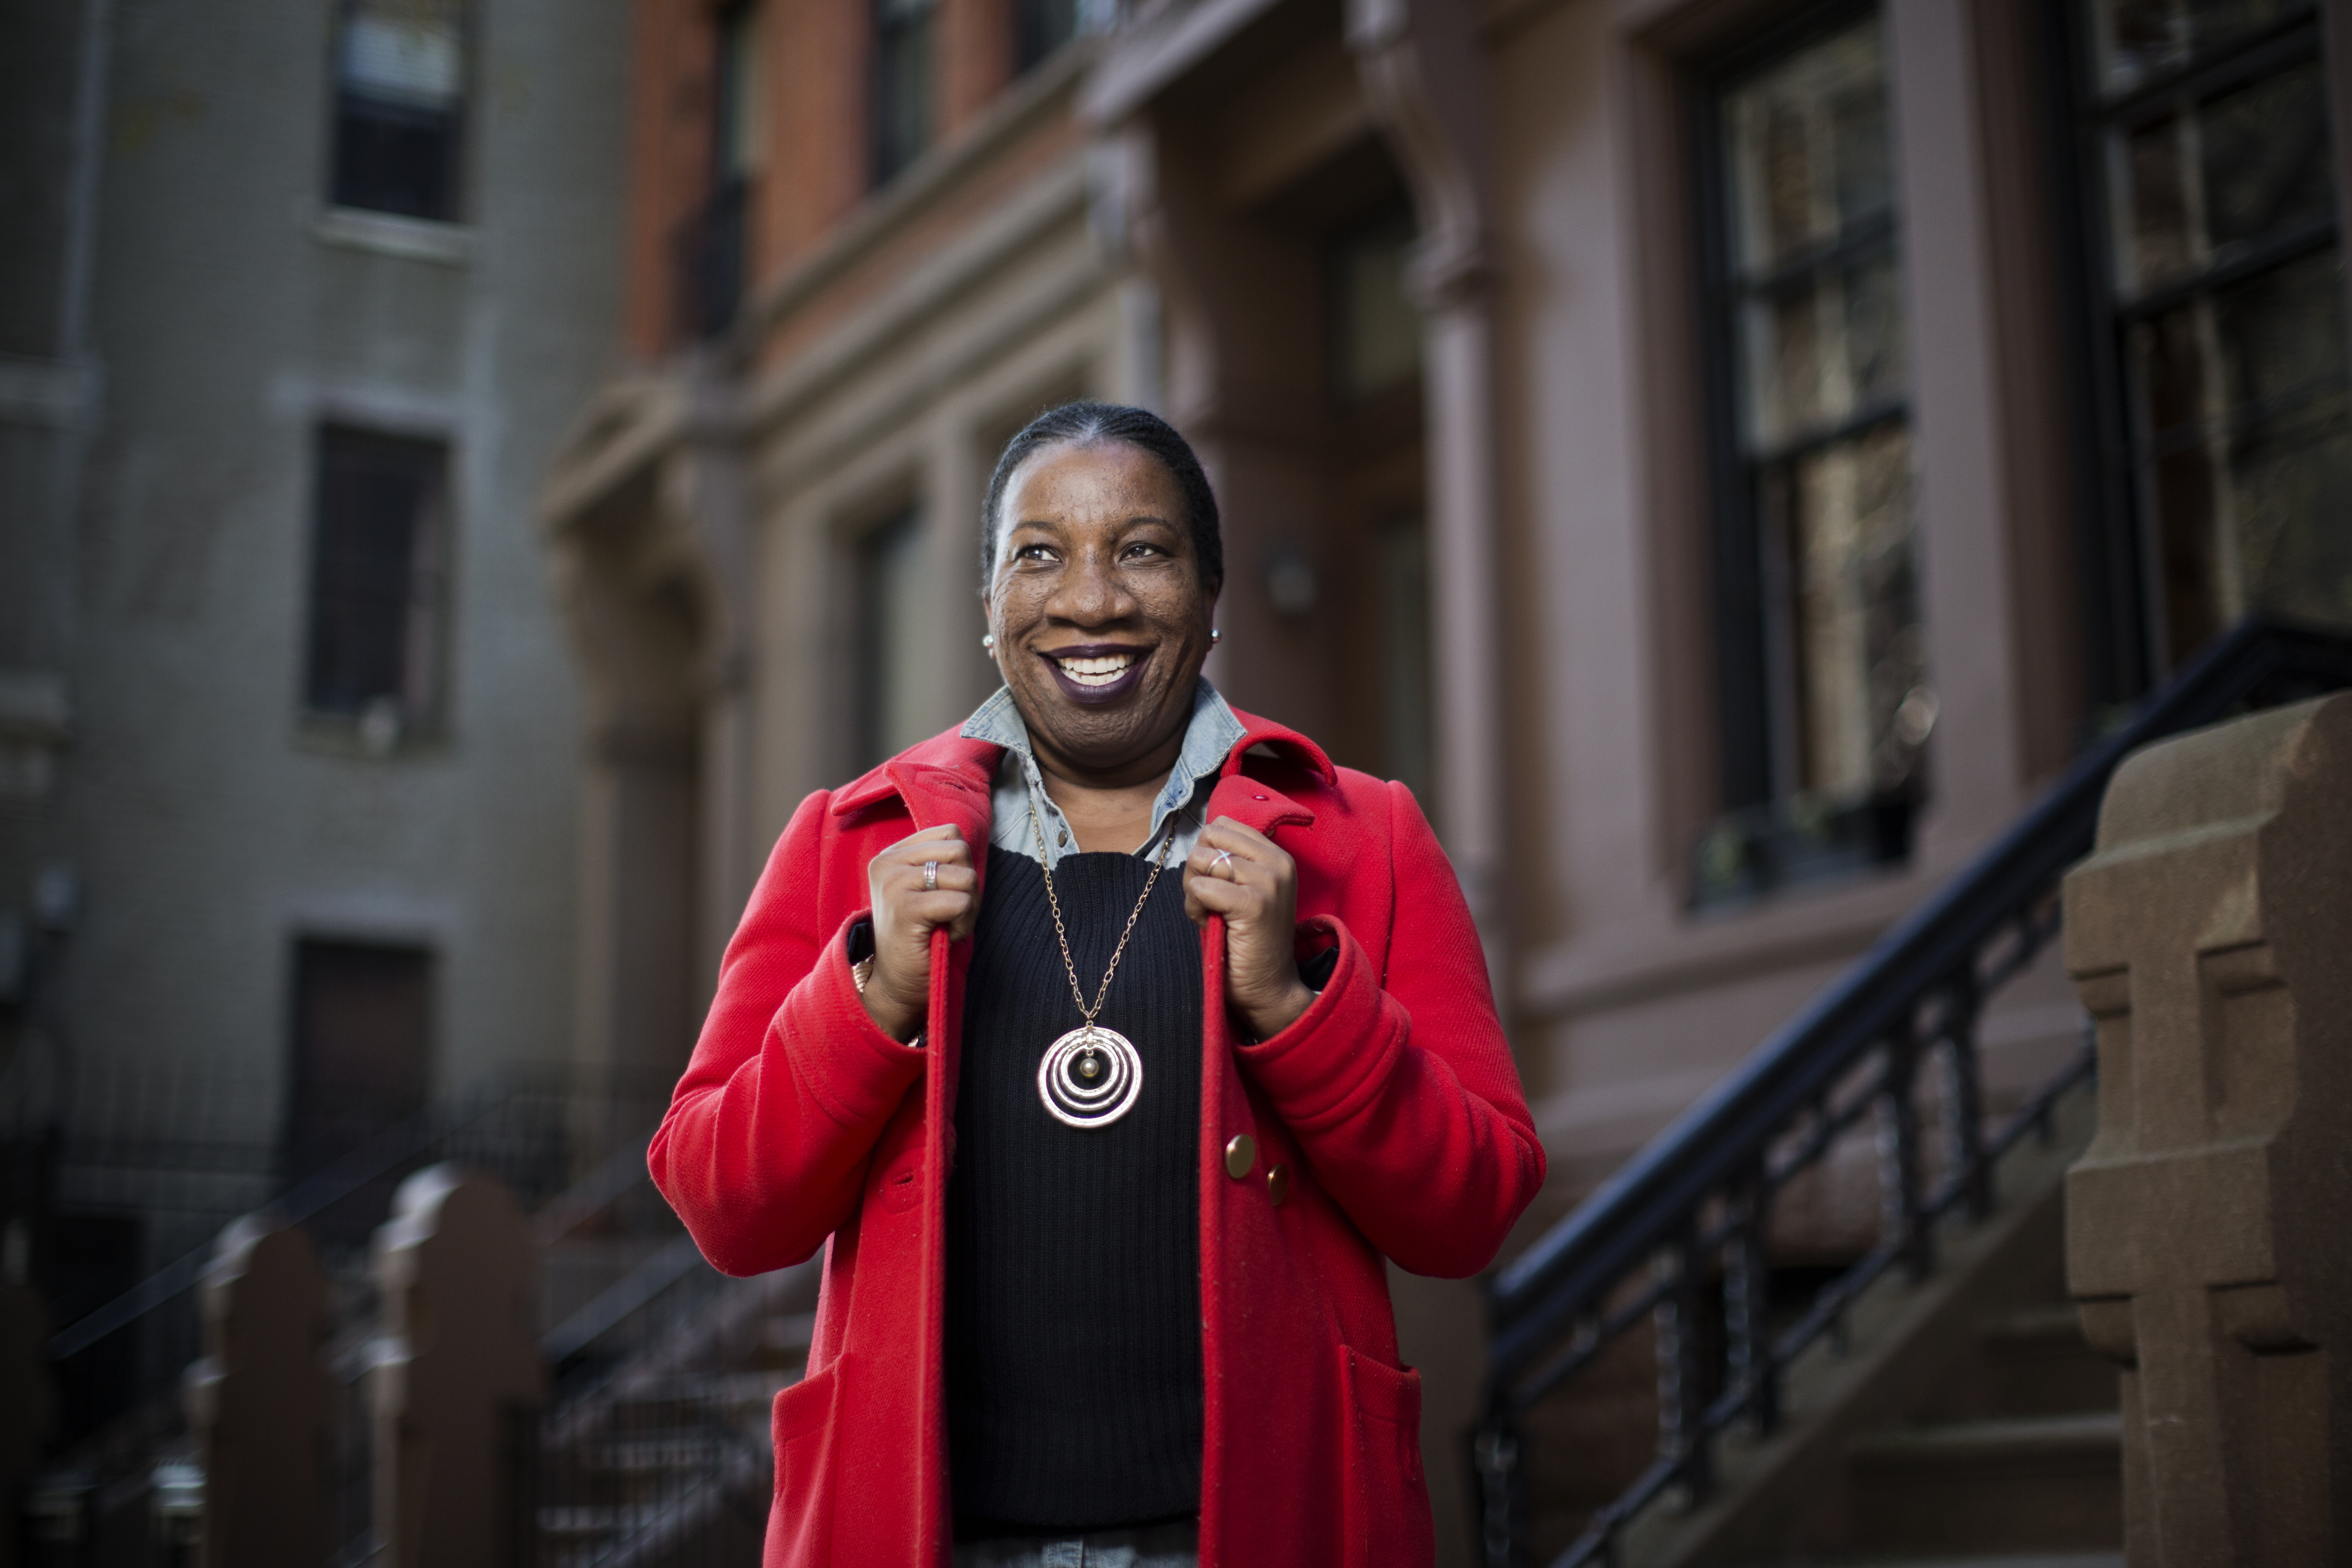 Me Too founder Tarana Burke: ‘This is a battle we can win’